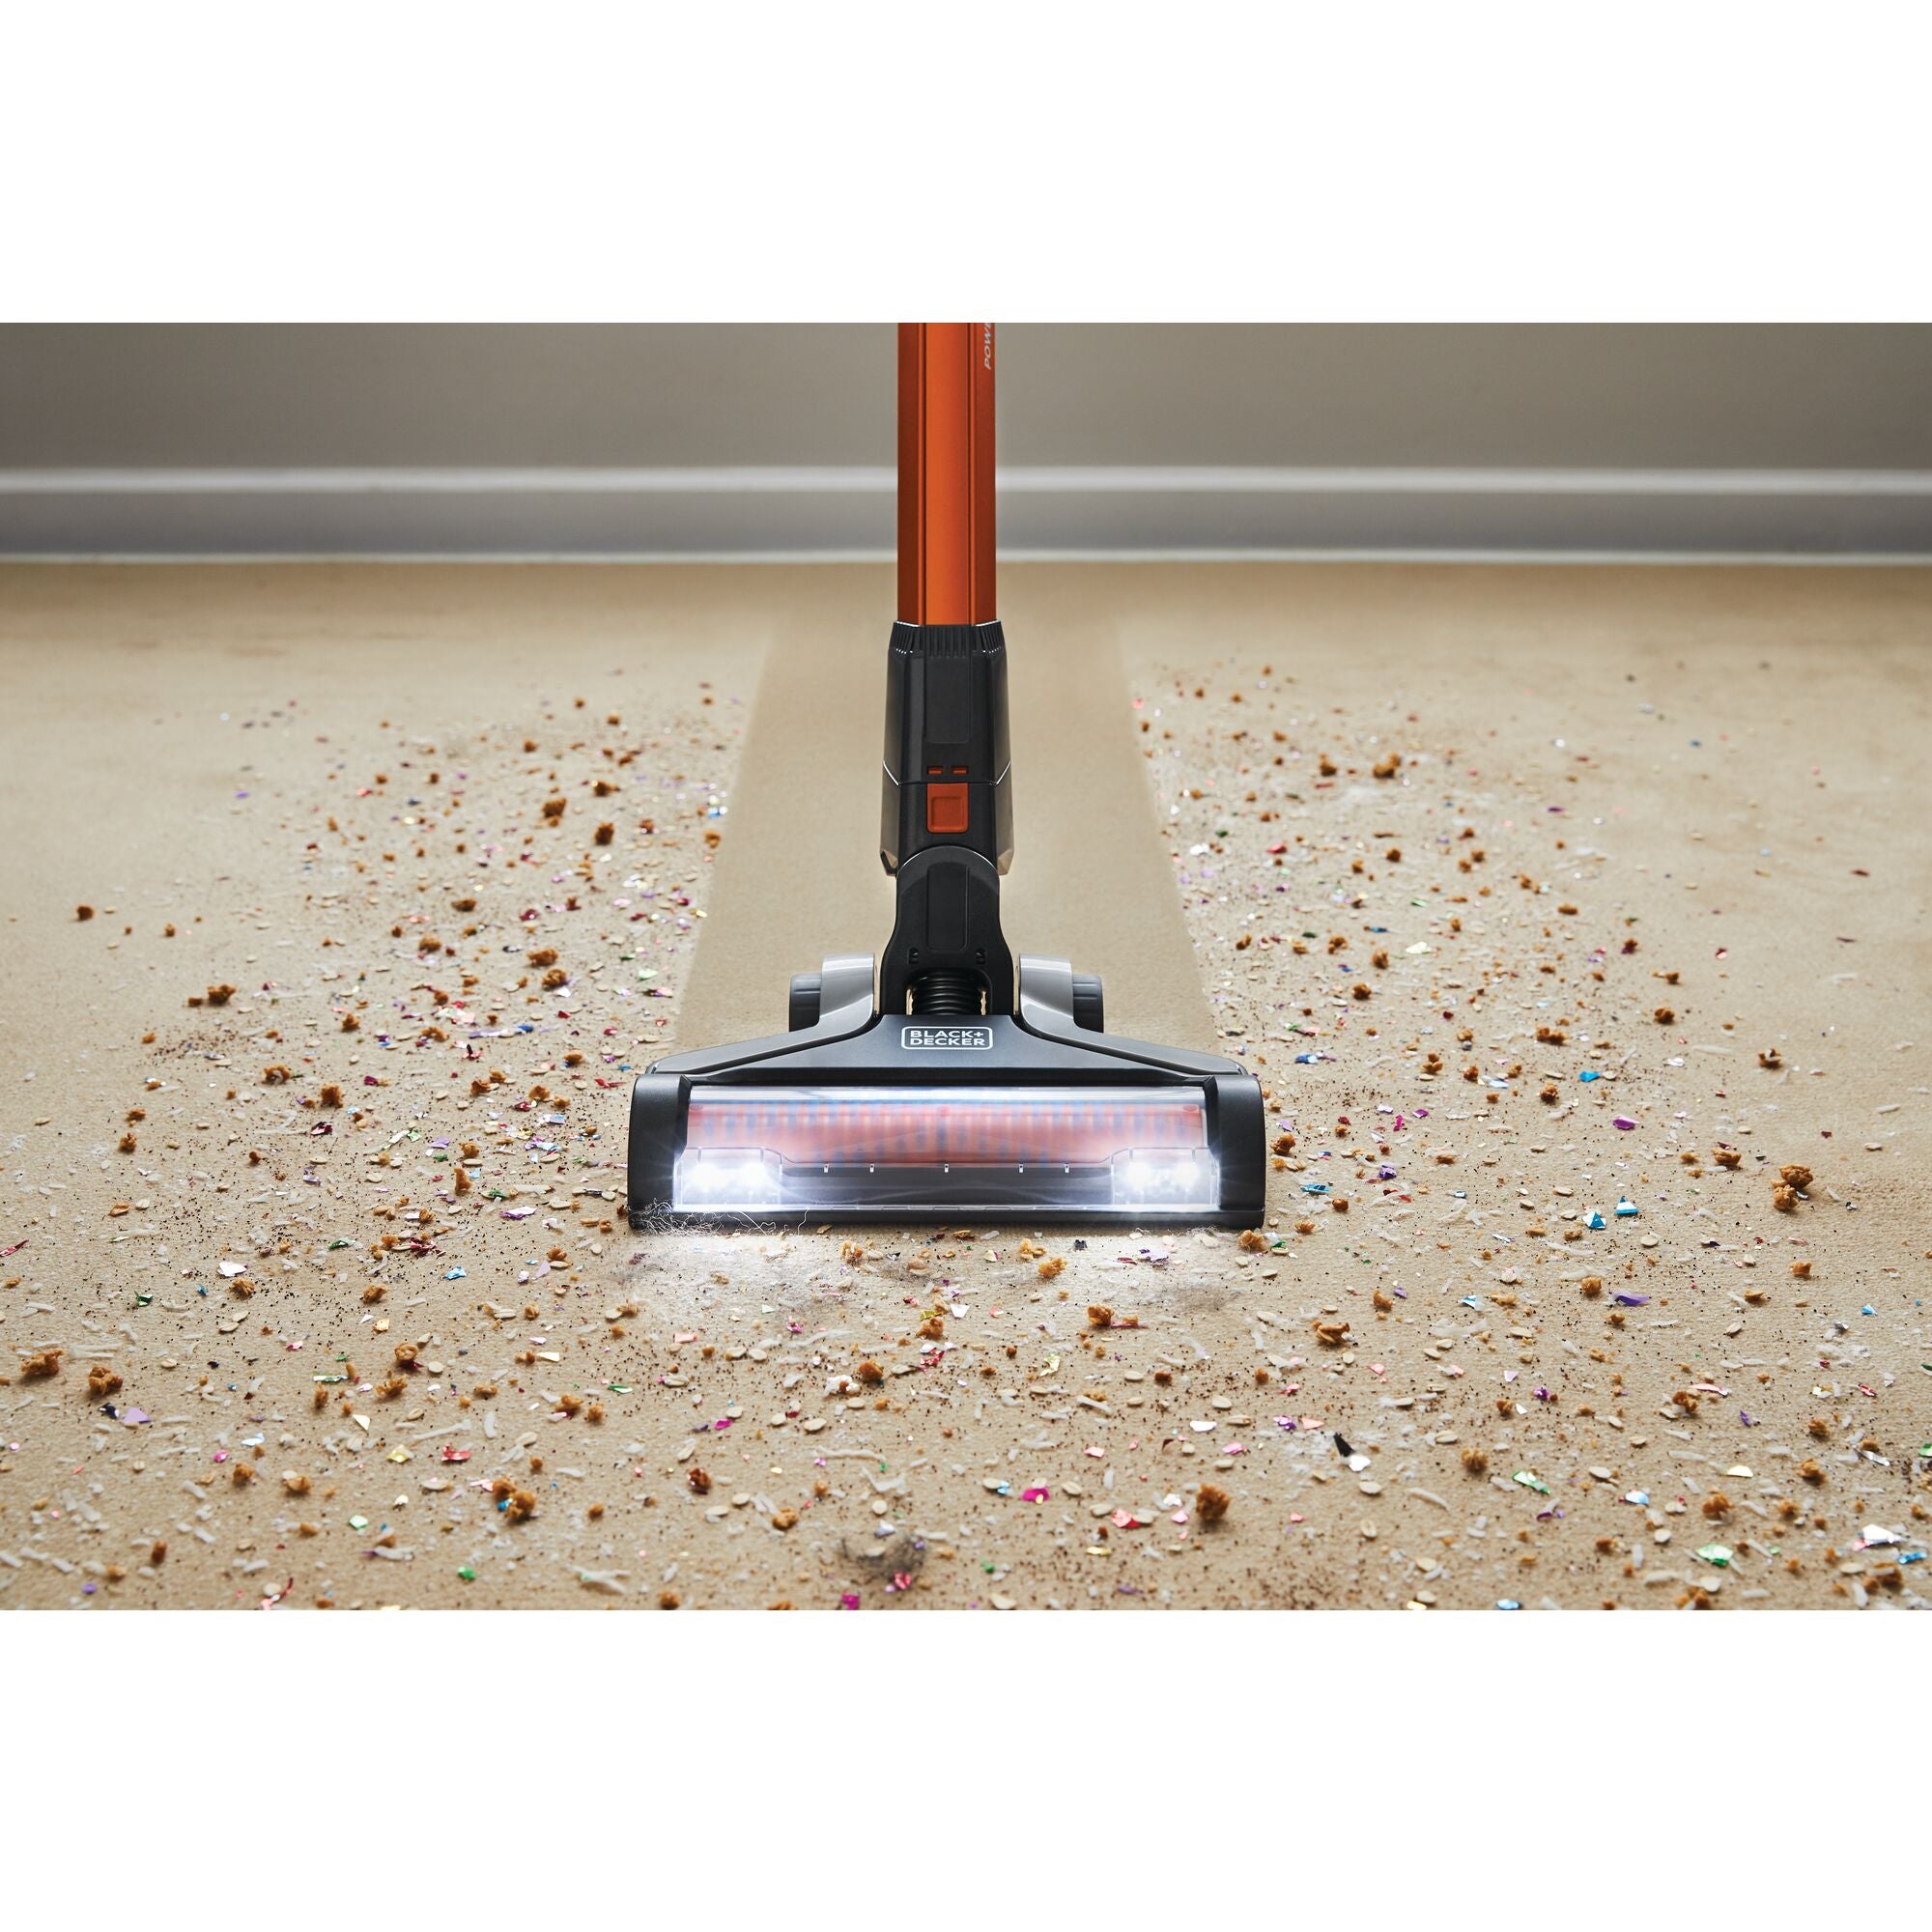 POWER SERIES Extreme Cordless Stick Vacuum Cleaner being used to clean debris from rug and wooden floor.